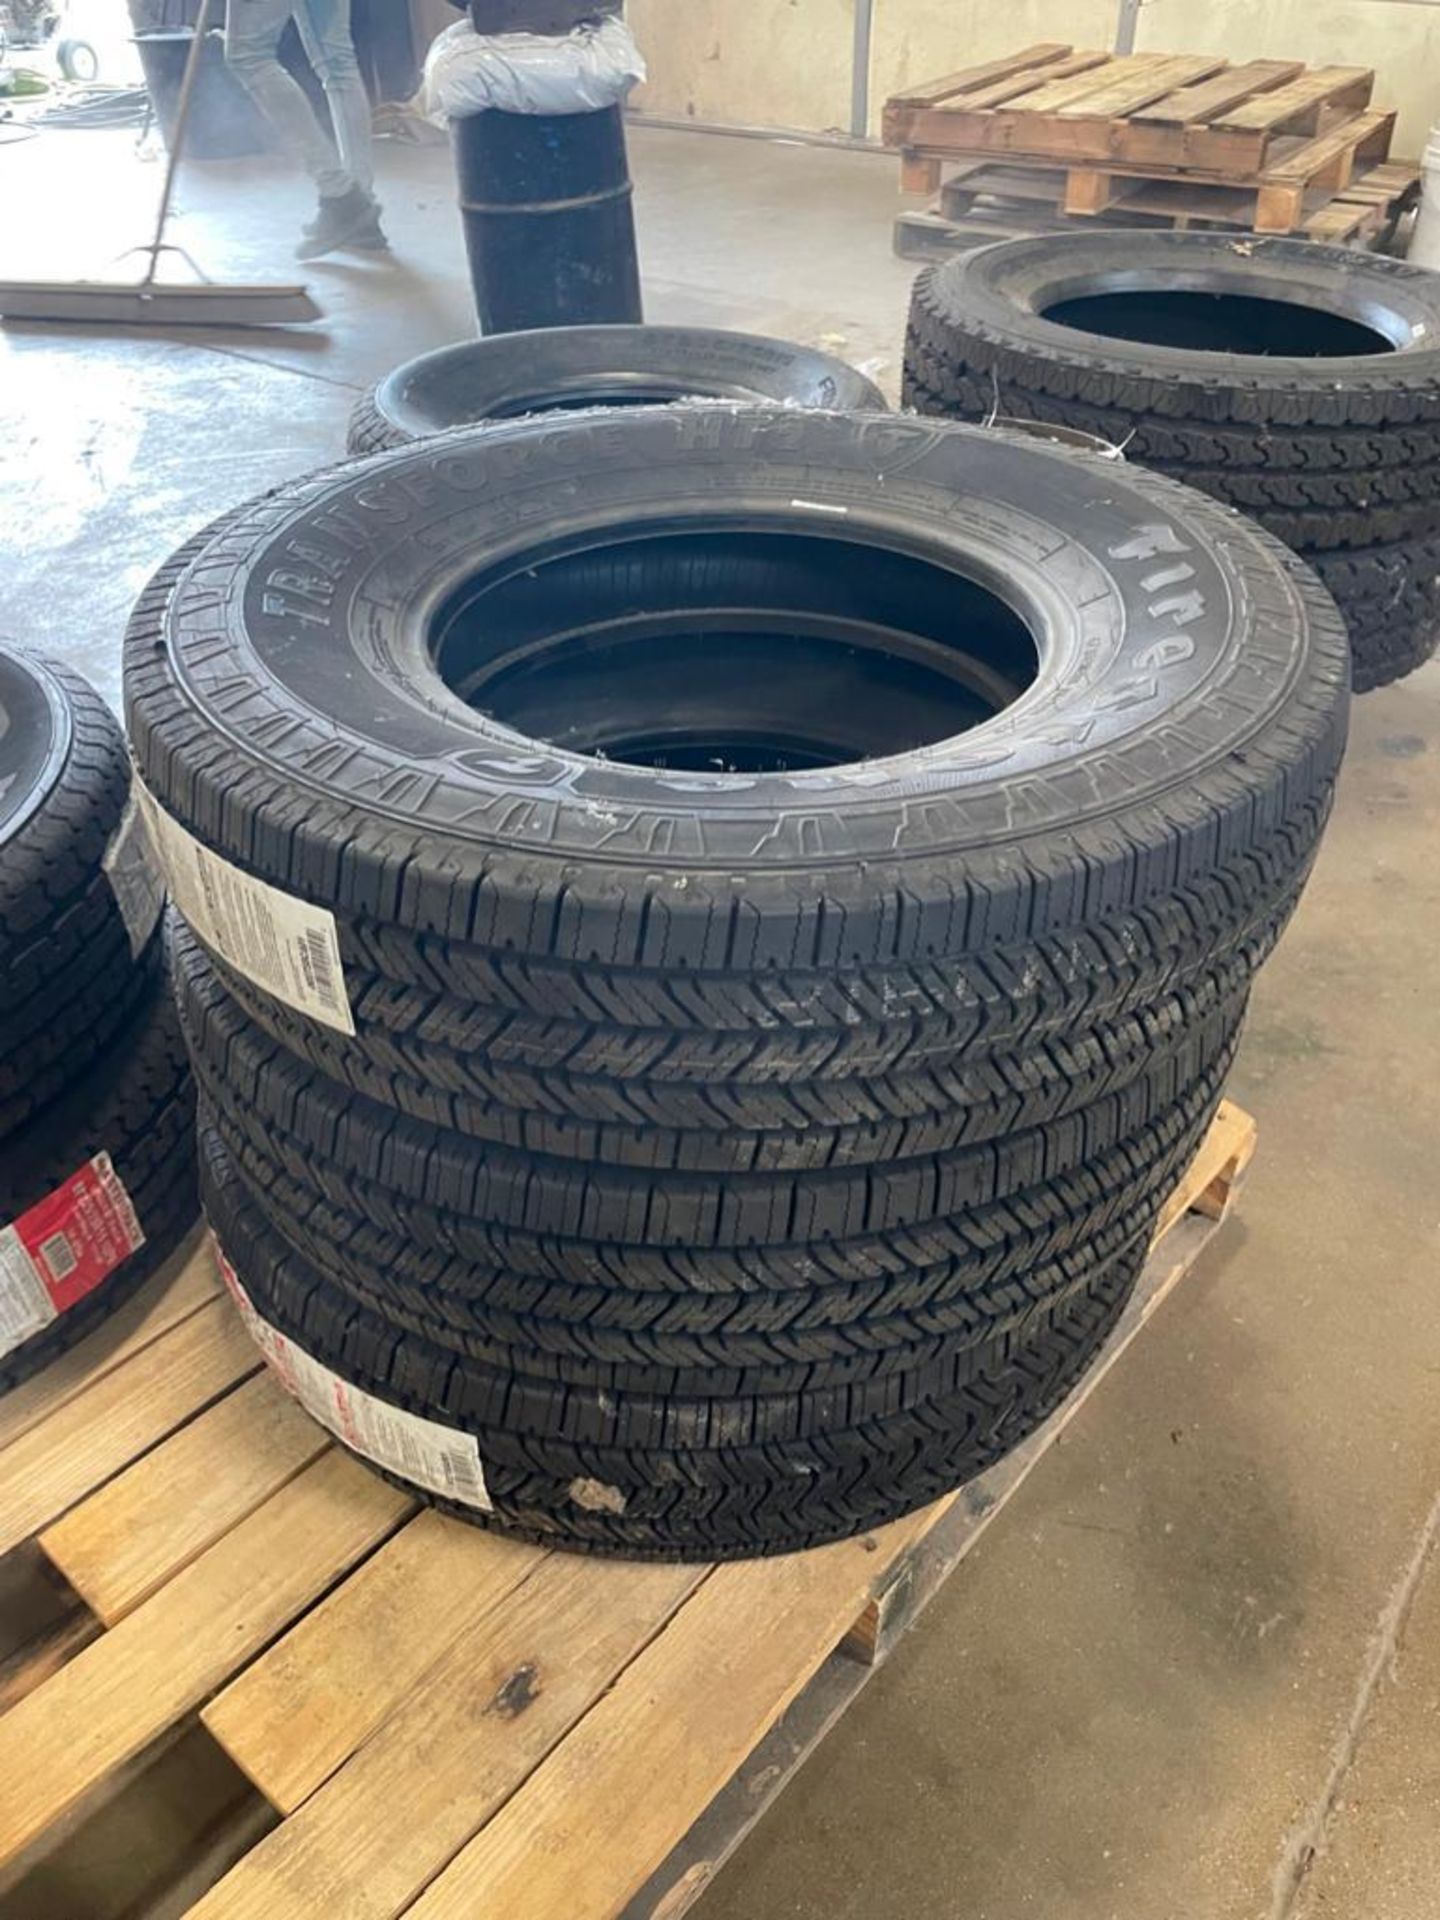 (3) New Firestone Transforce HT2, LT215/85R16 Tires. Located in Hazelwood, MO